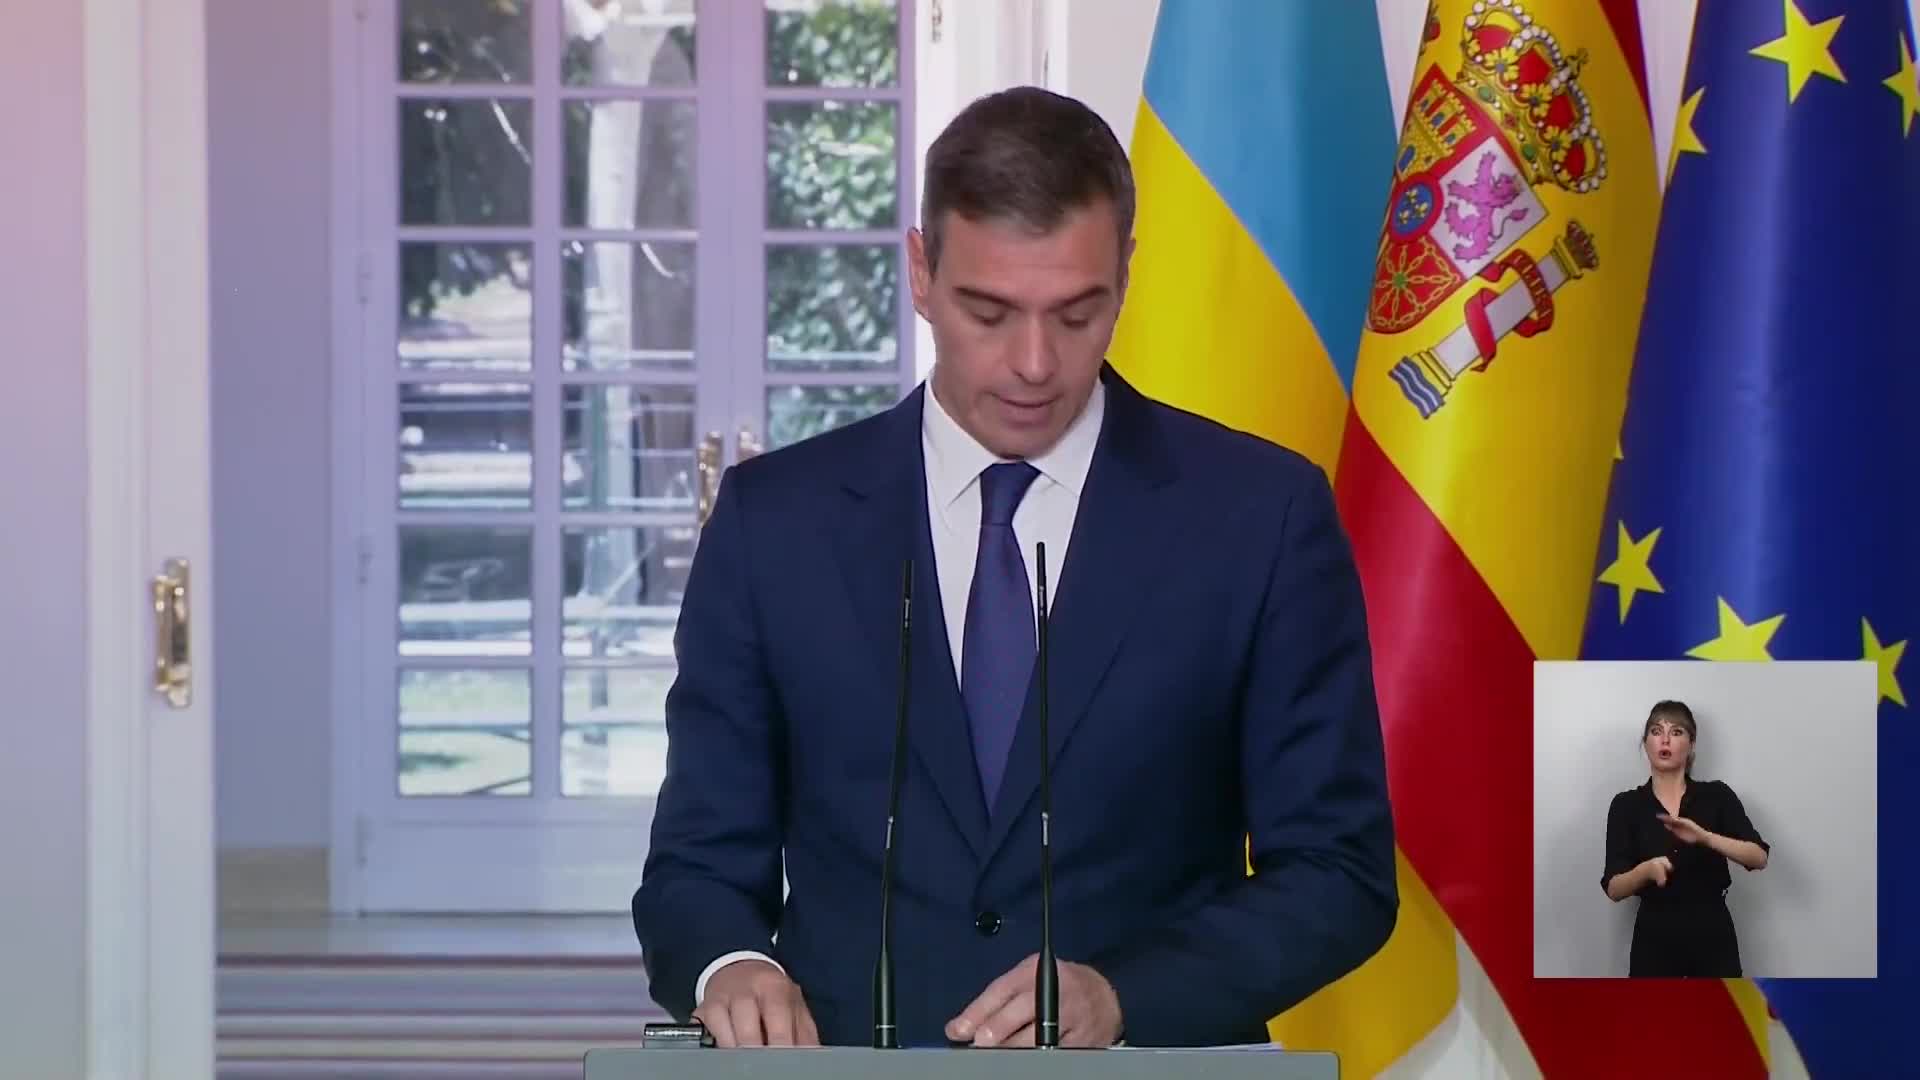 Sánchez confirms Spain's firm commitment to Ukraine and highlights several areas: Ukraine will be provided with instruments for its defense. Humanitarian, financial support, reconstruction aid. Military commitment of one billion euros to strengthen its capabilities